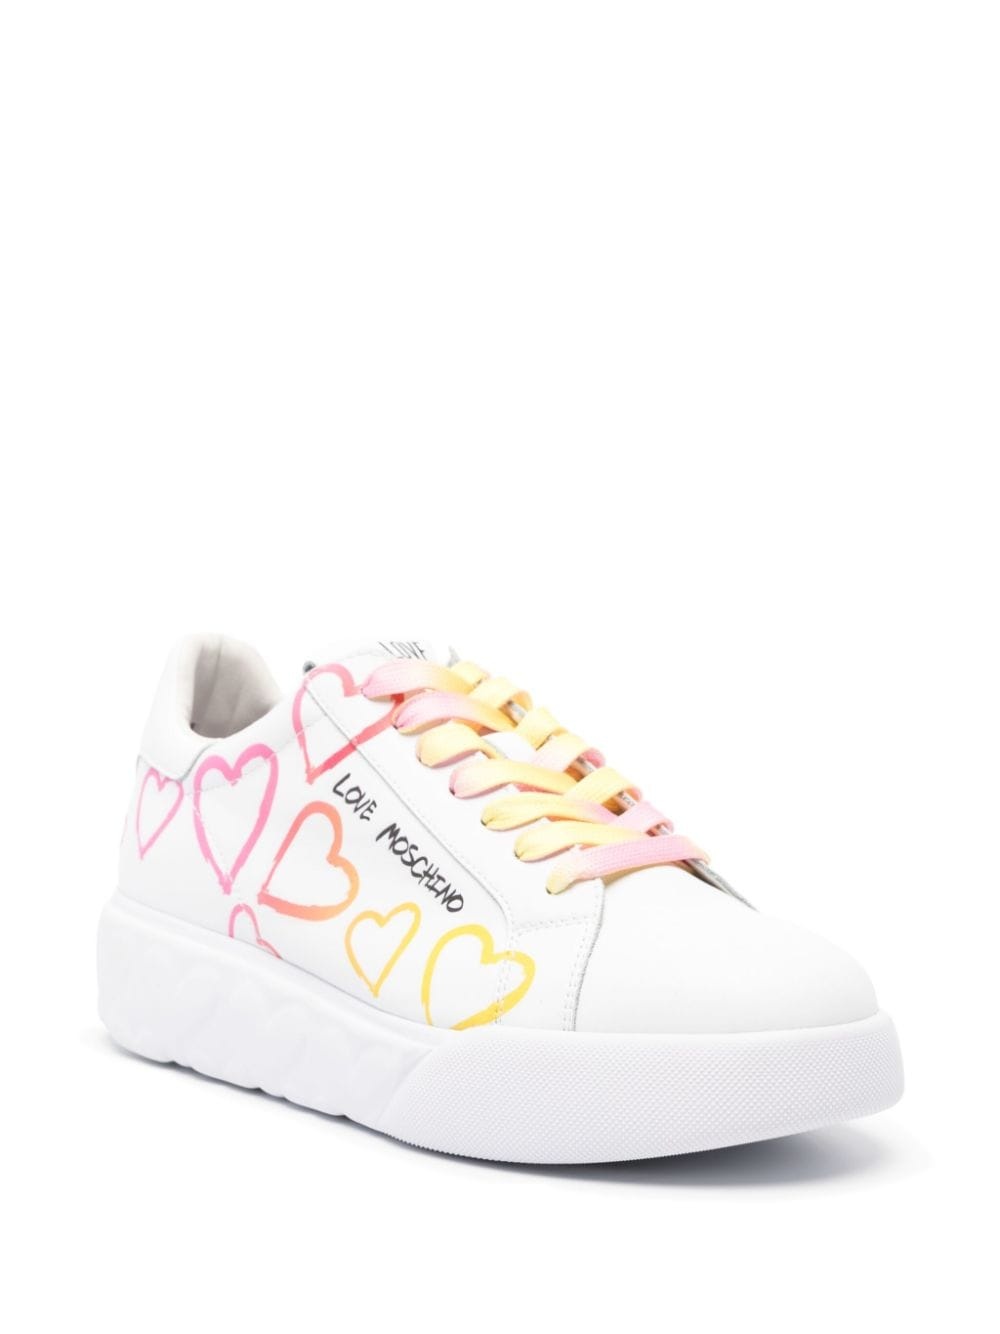 logo-print leather sneakers - 2